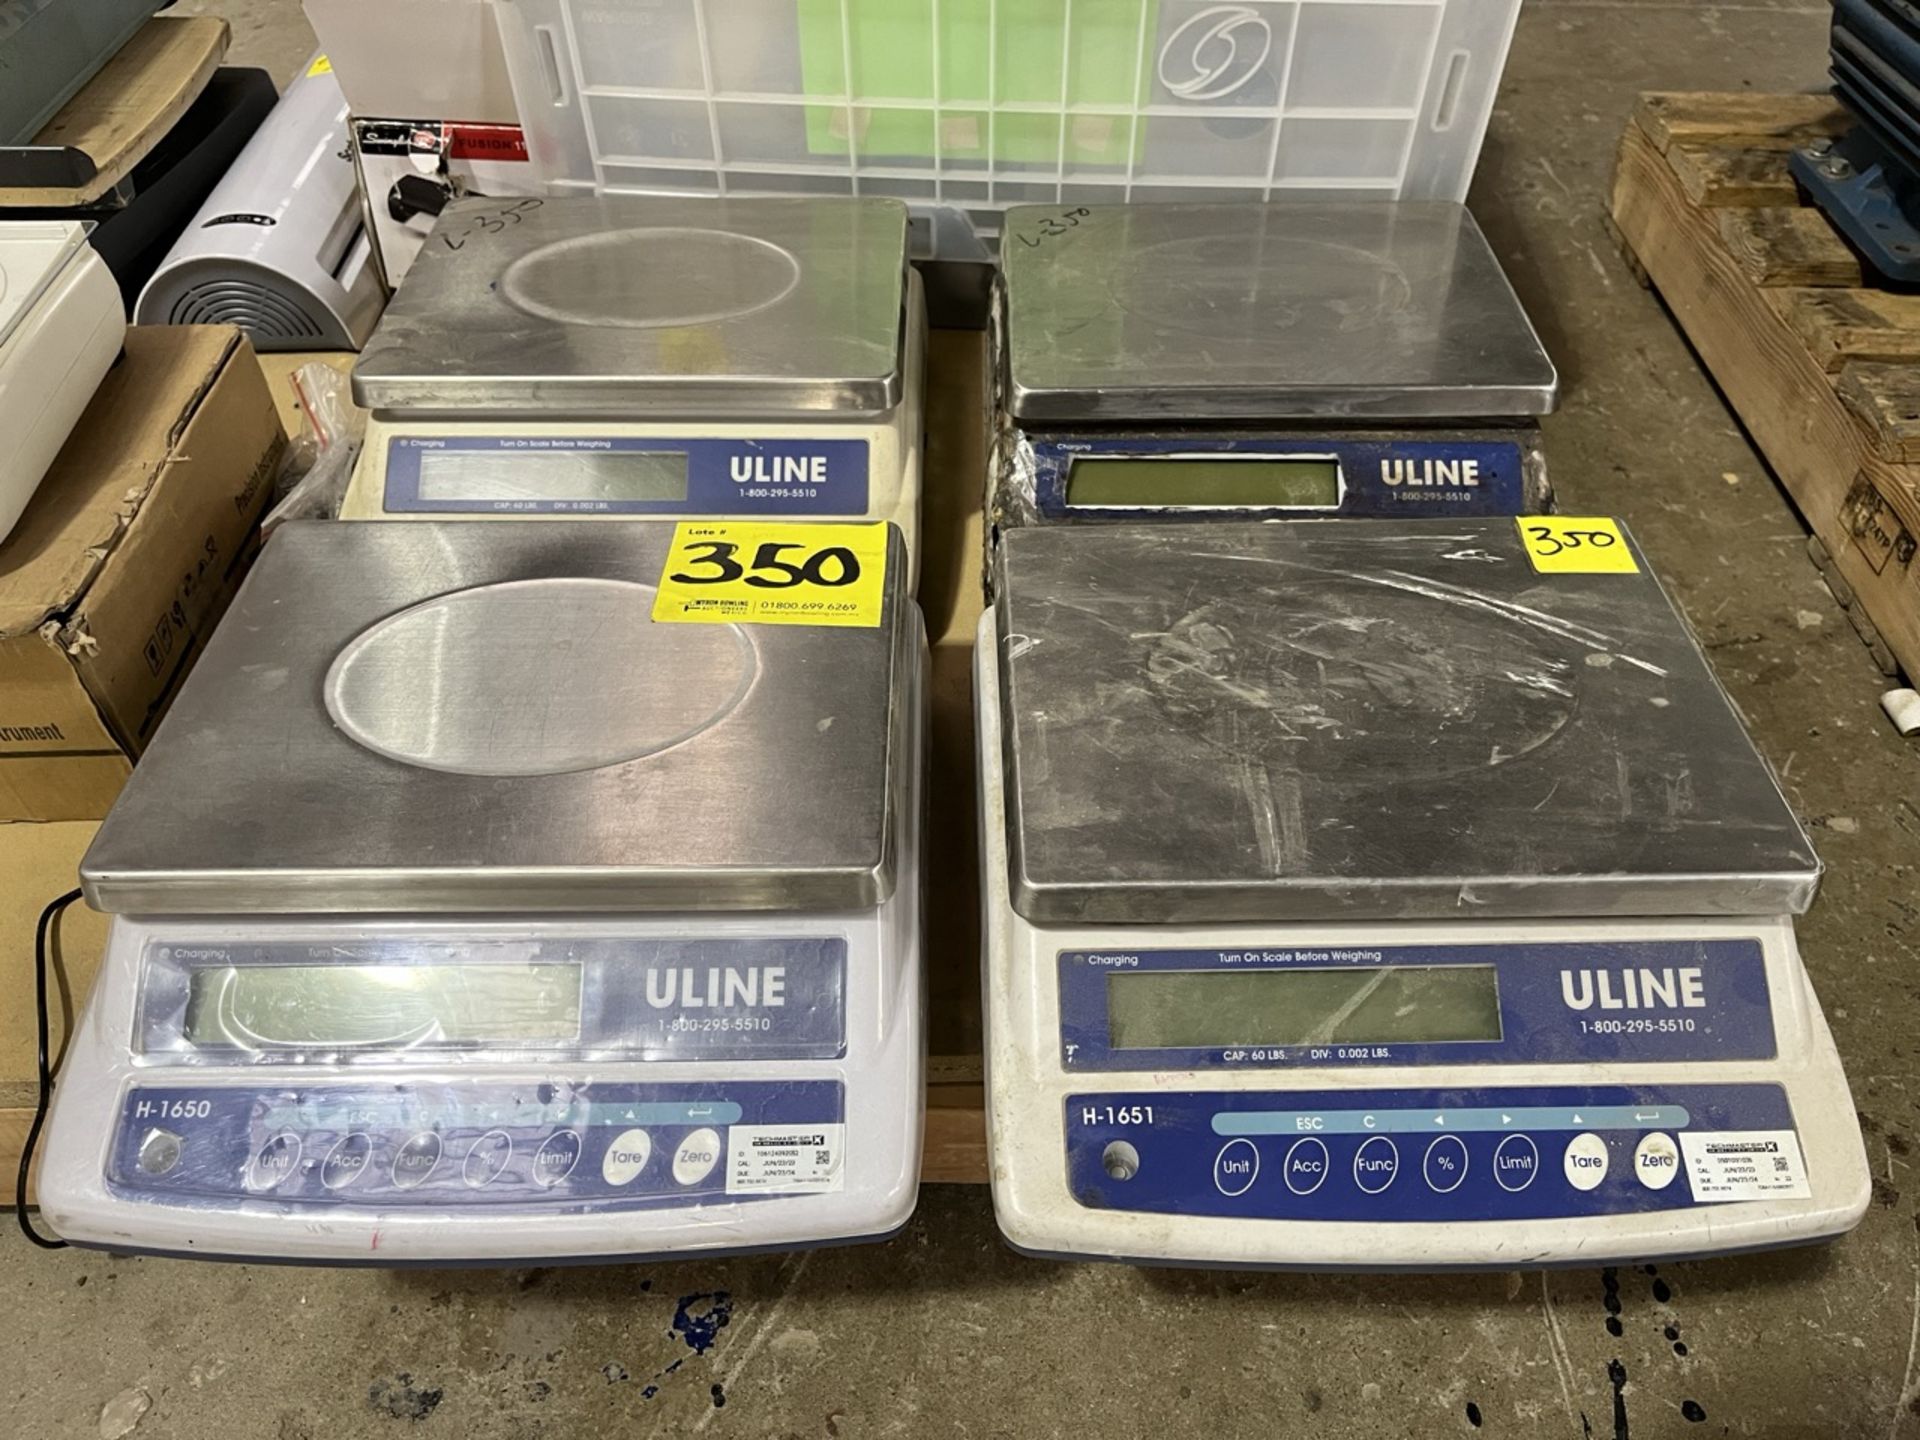 Lot of 4 pieces contains: 3 Uline Precision Electronic Scales, model H-1651; 1 Uline Precision Elec